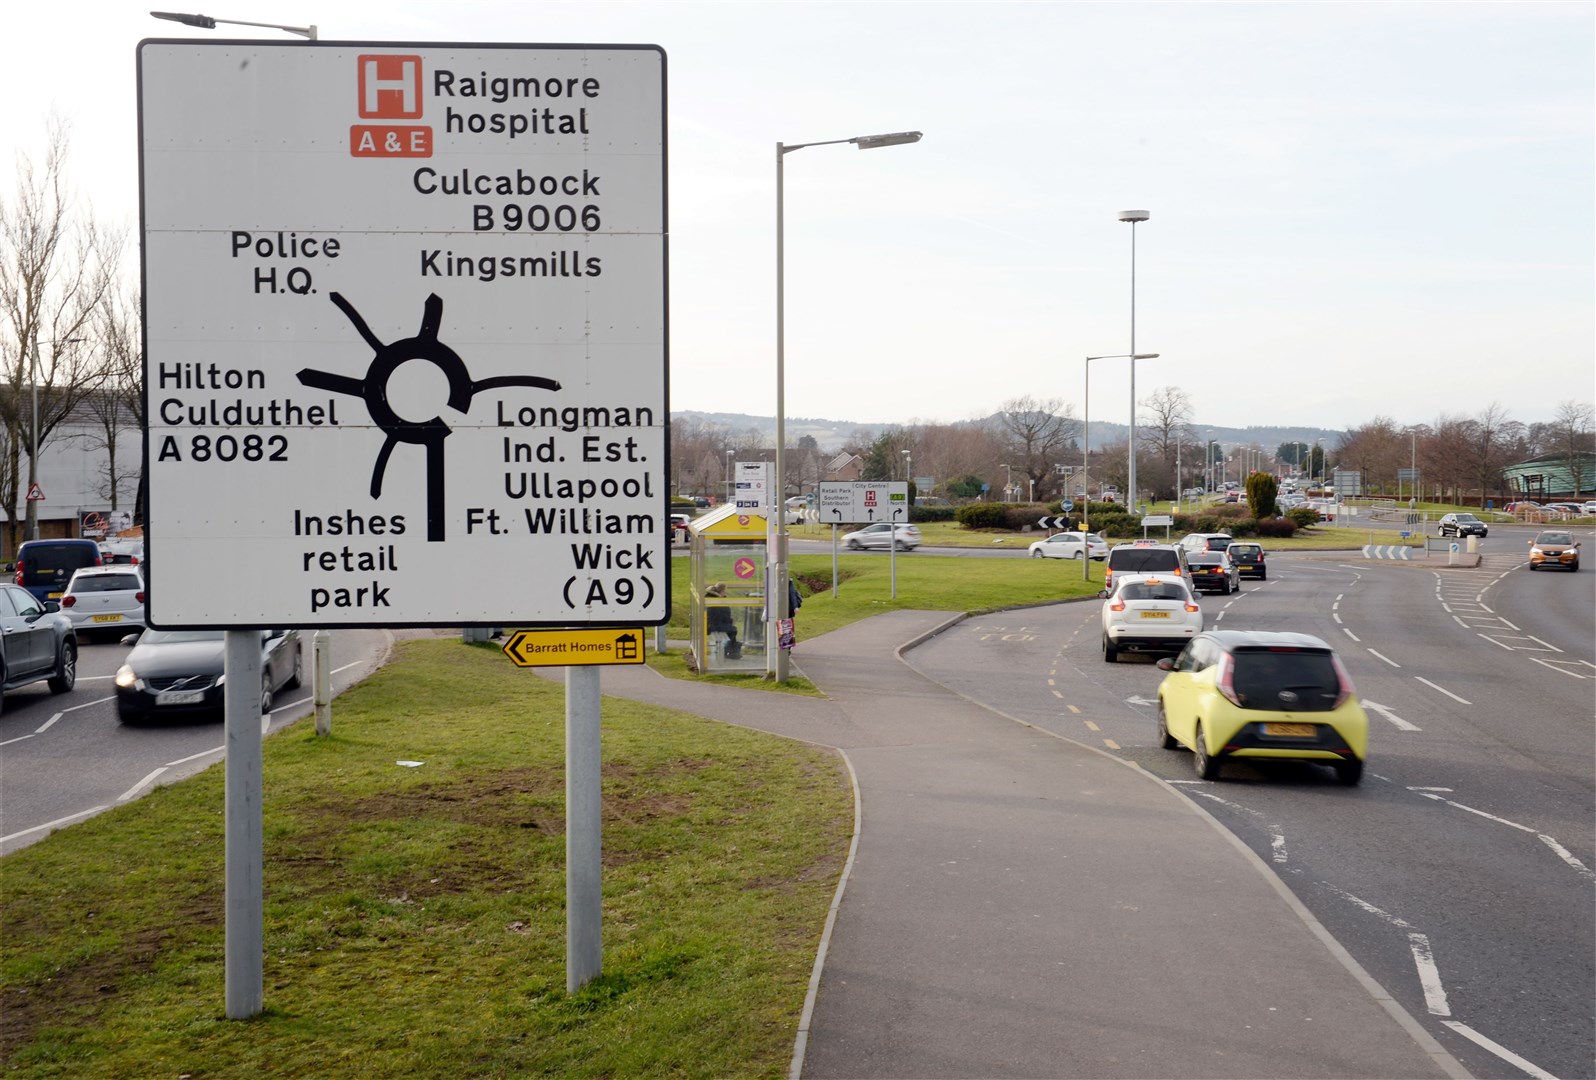 The proposed scheme includes creating a signalised four-way roundabout by reducing the number of vehicular access points.